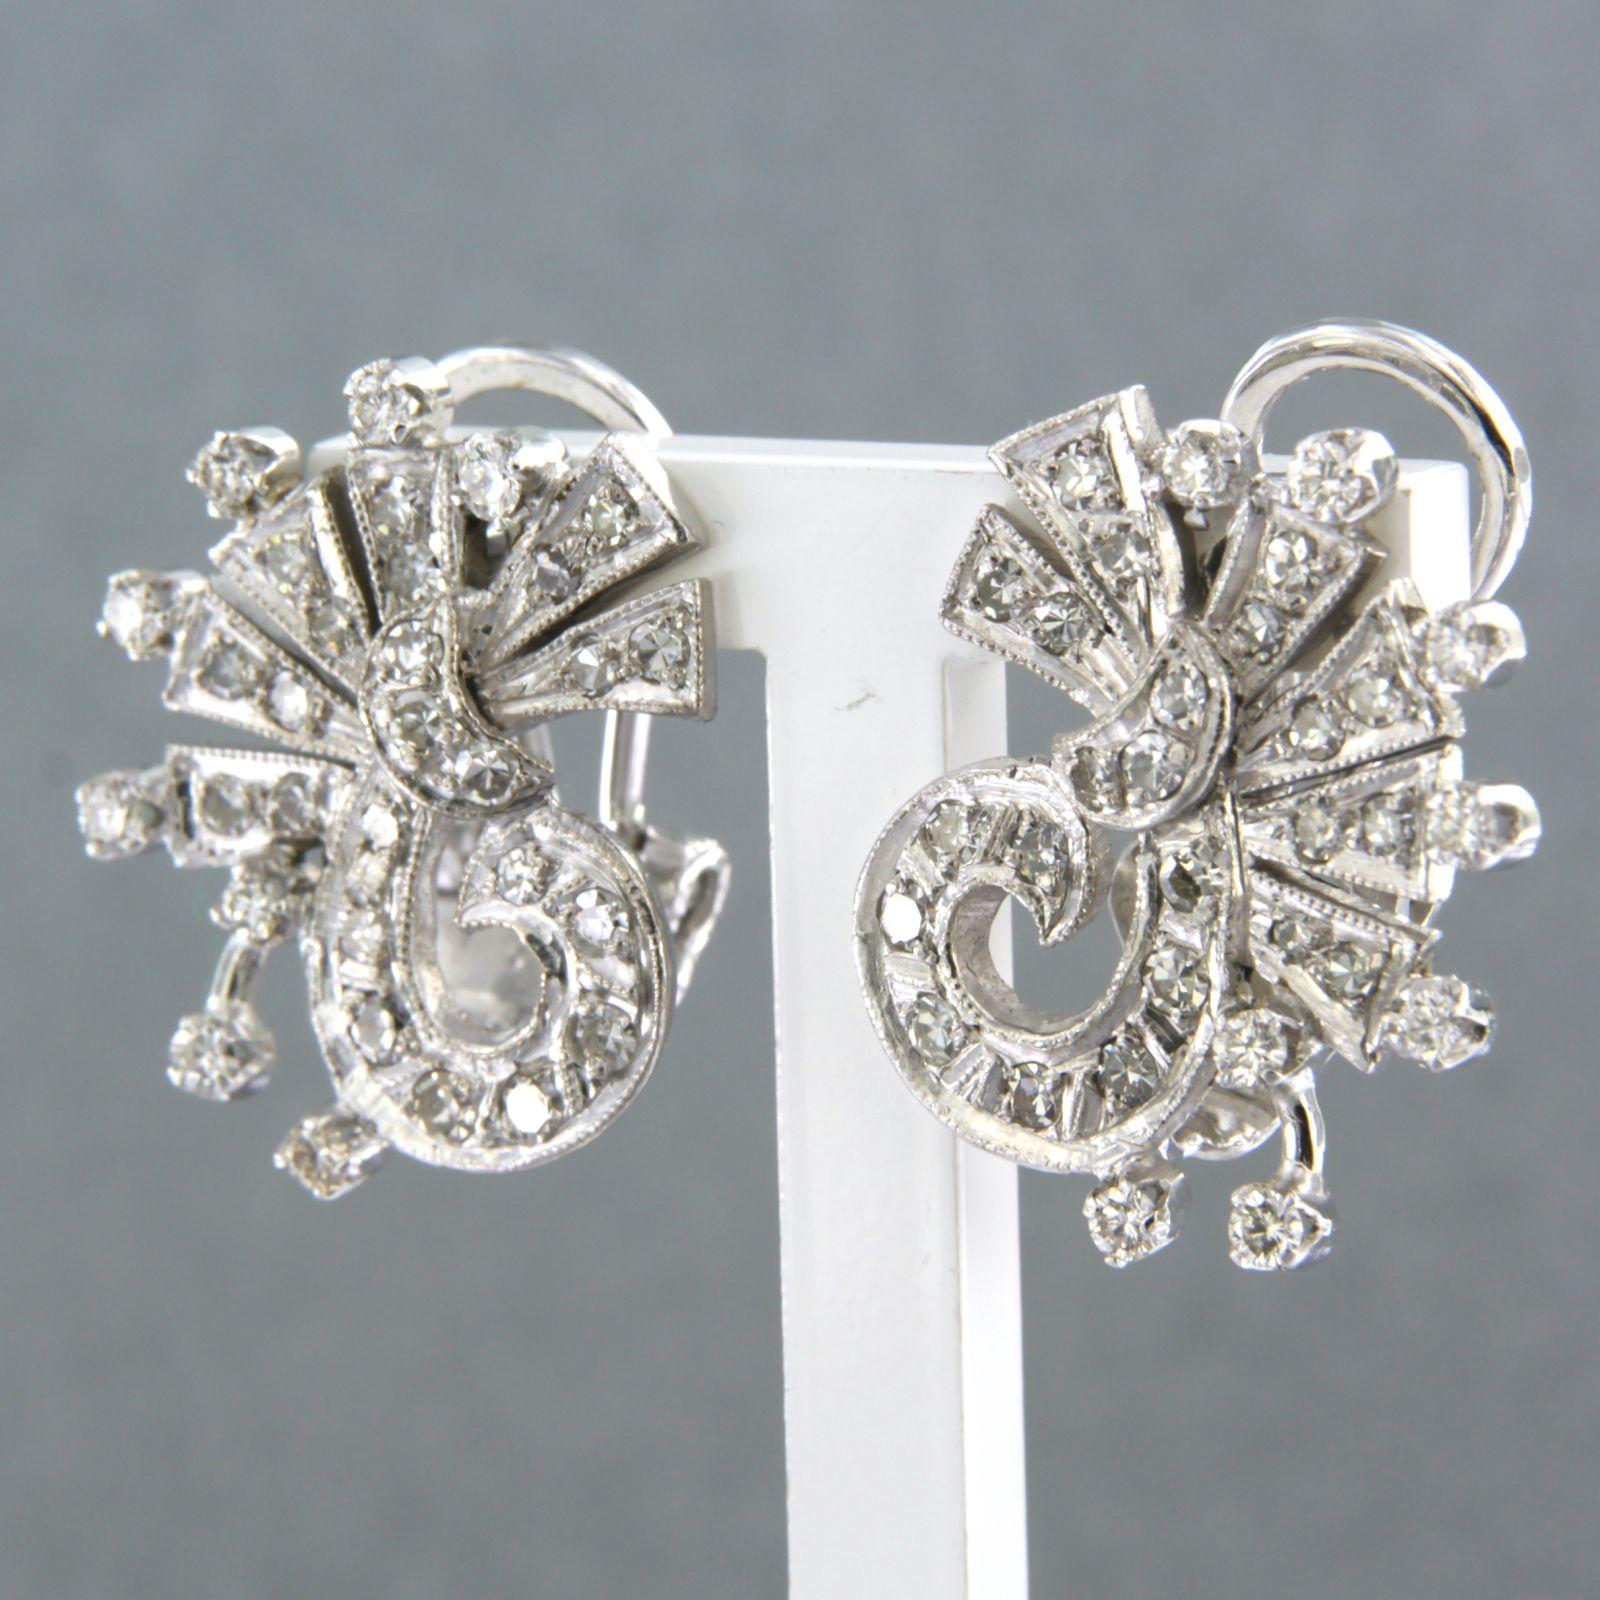 Brilliant Cut Earrings set with diamonds 14k white gold For Sale